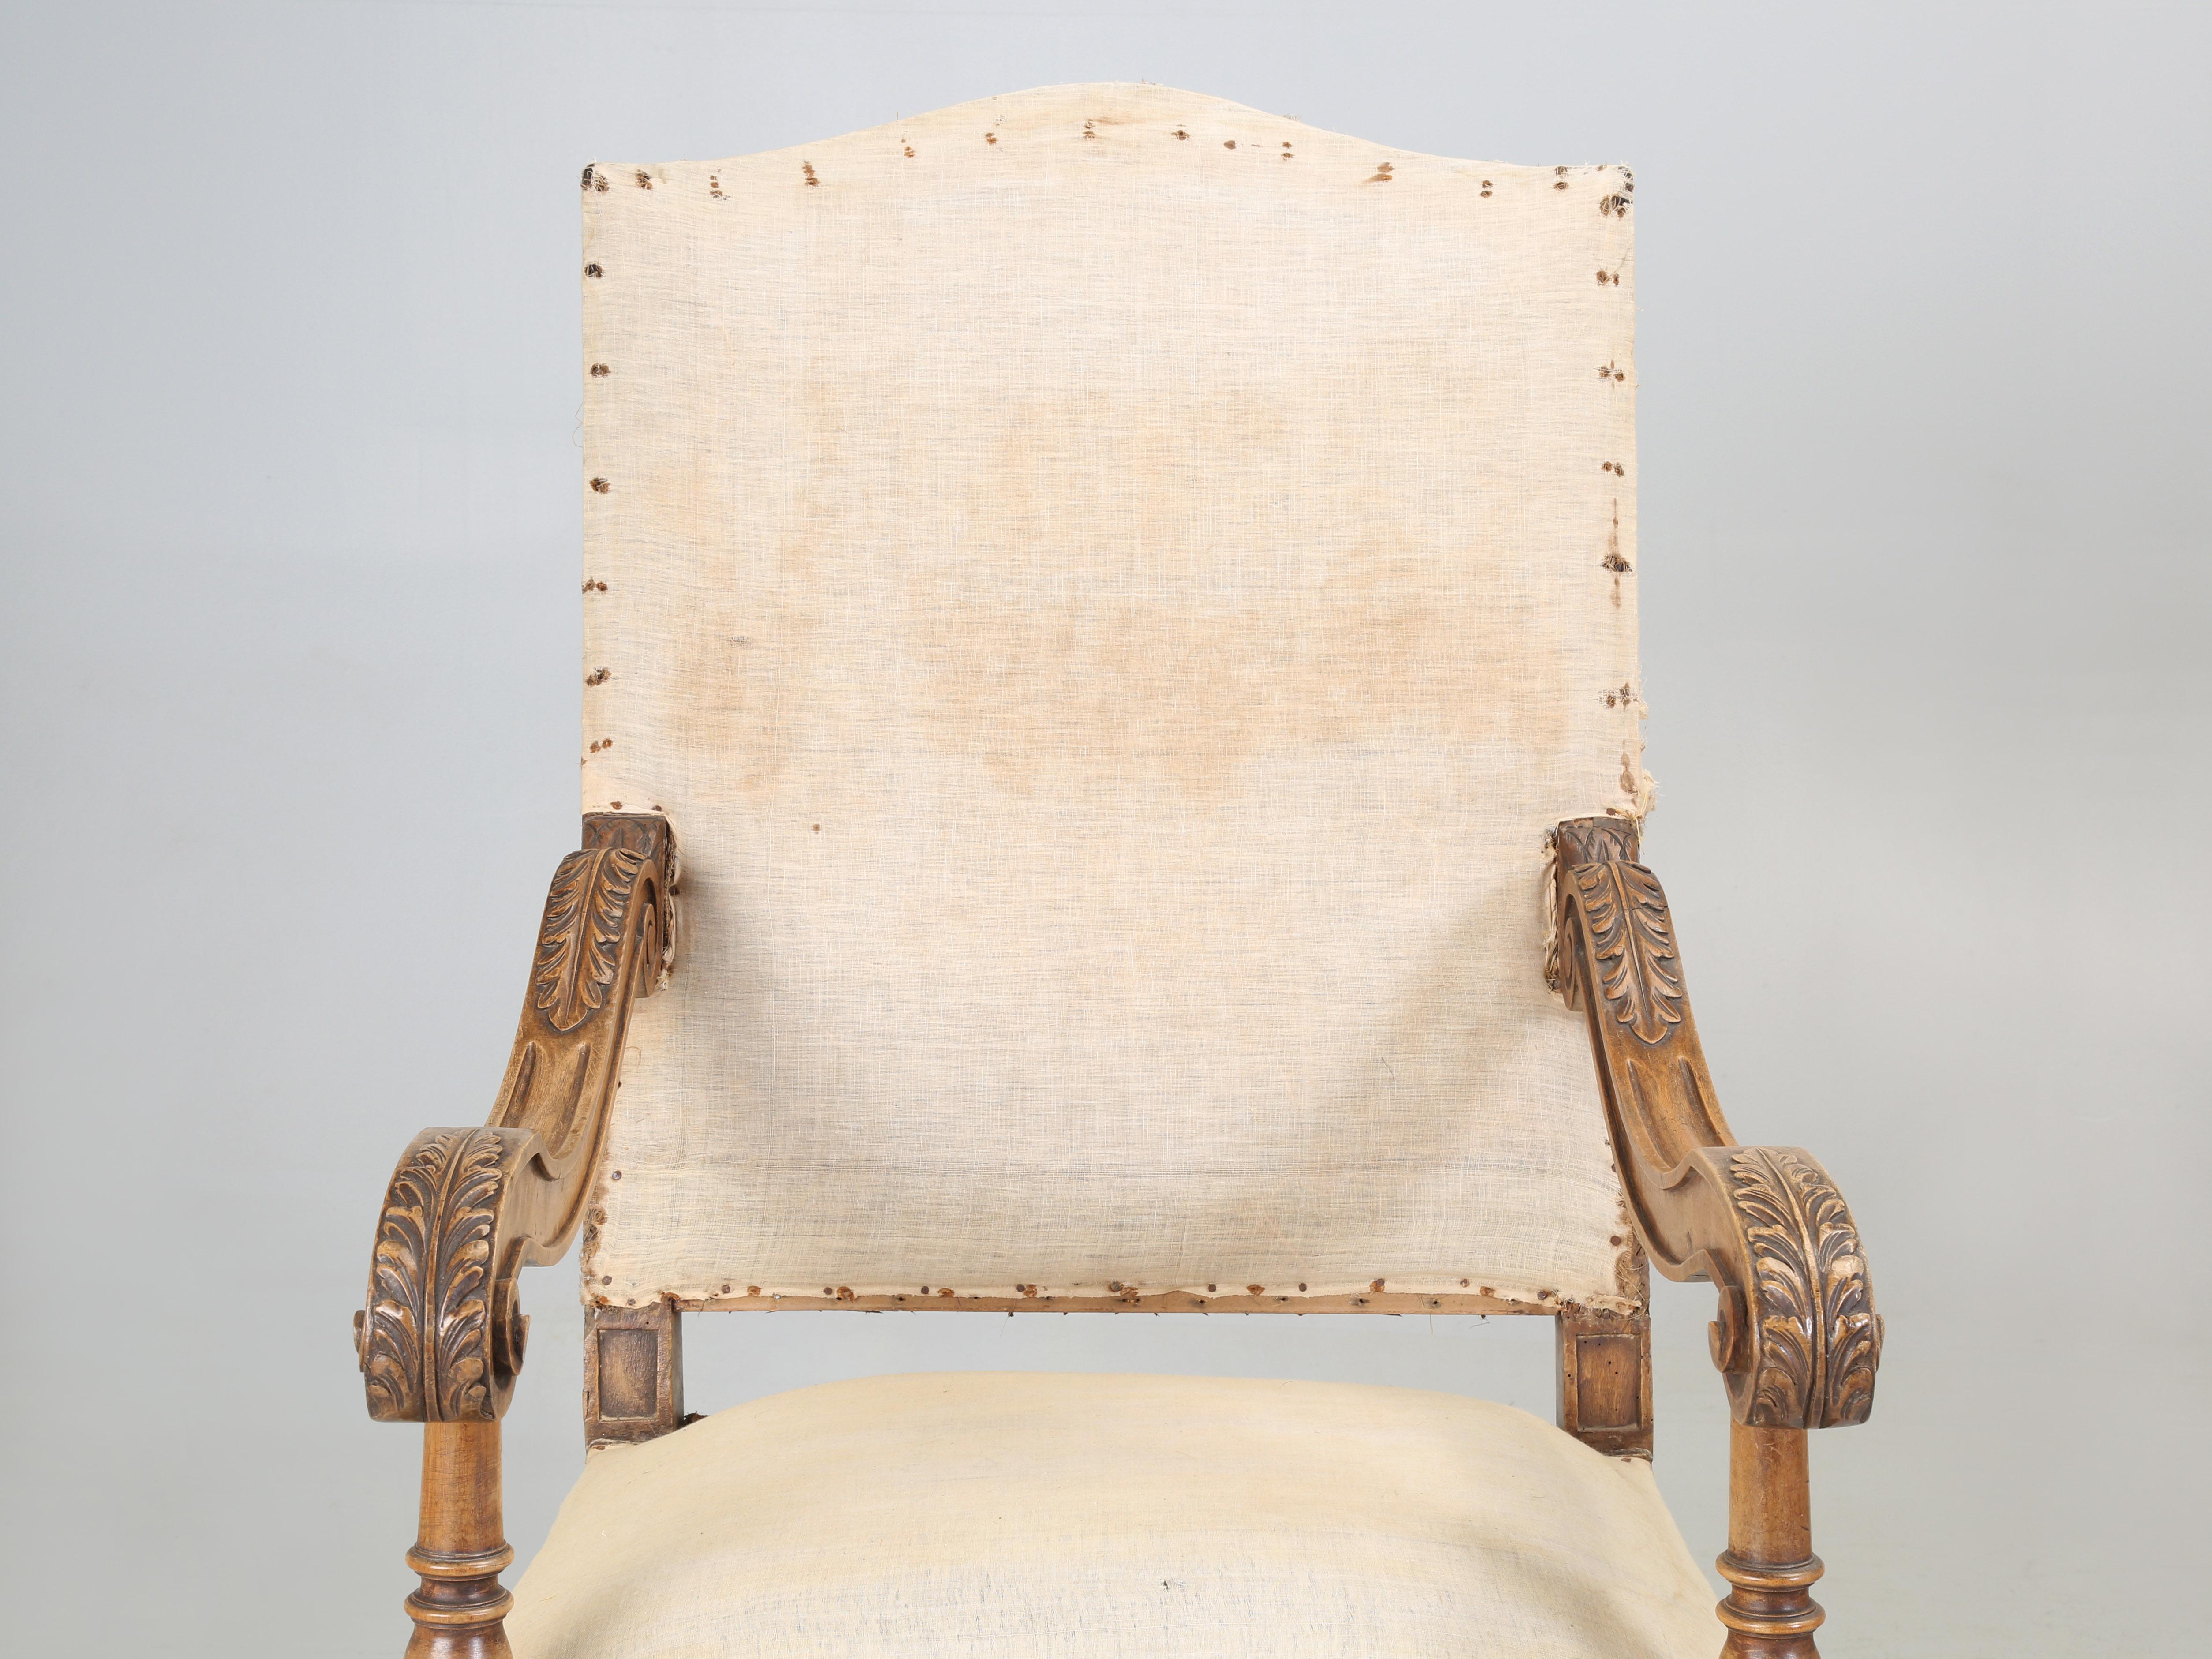 Antique Italian pair of Armchairs Hand-Carved from Walnut is desperate need of a full restoration. Currently, we have (2) pairs of Matching Italian Armchairs that all must have come out of the same Italian home and all (4) armchairs are in need of a